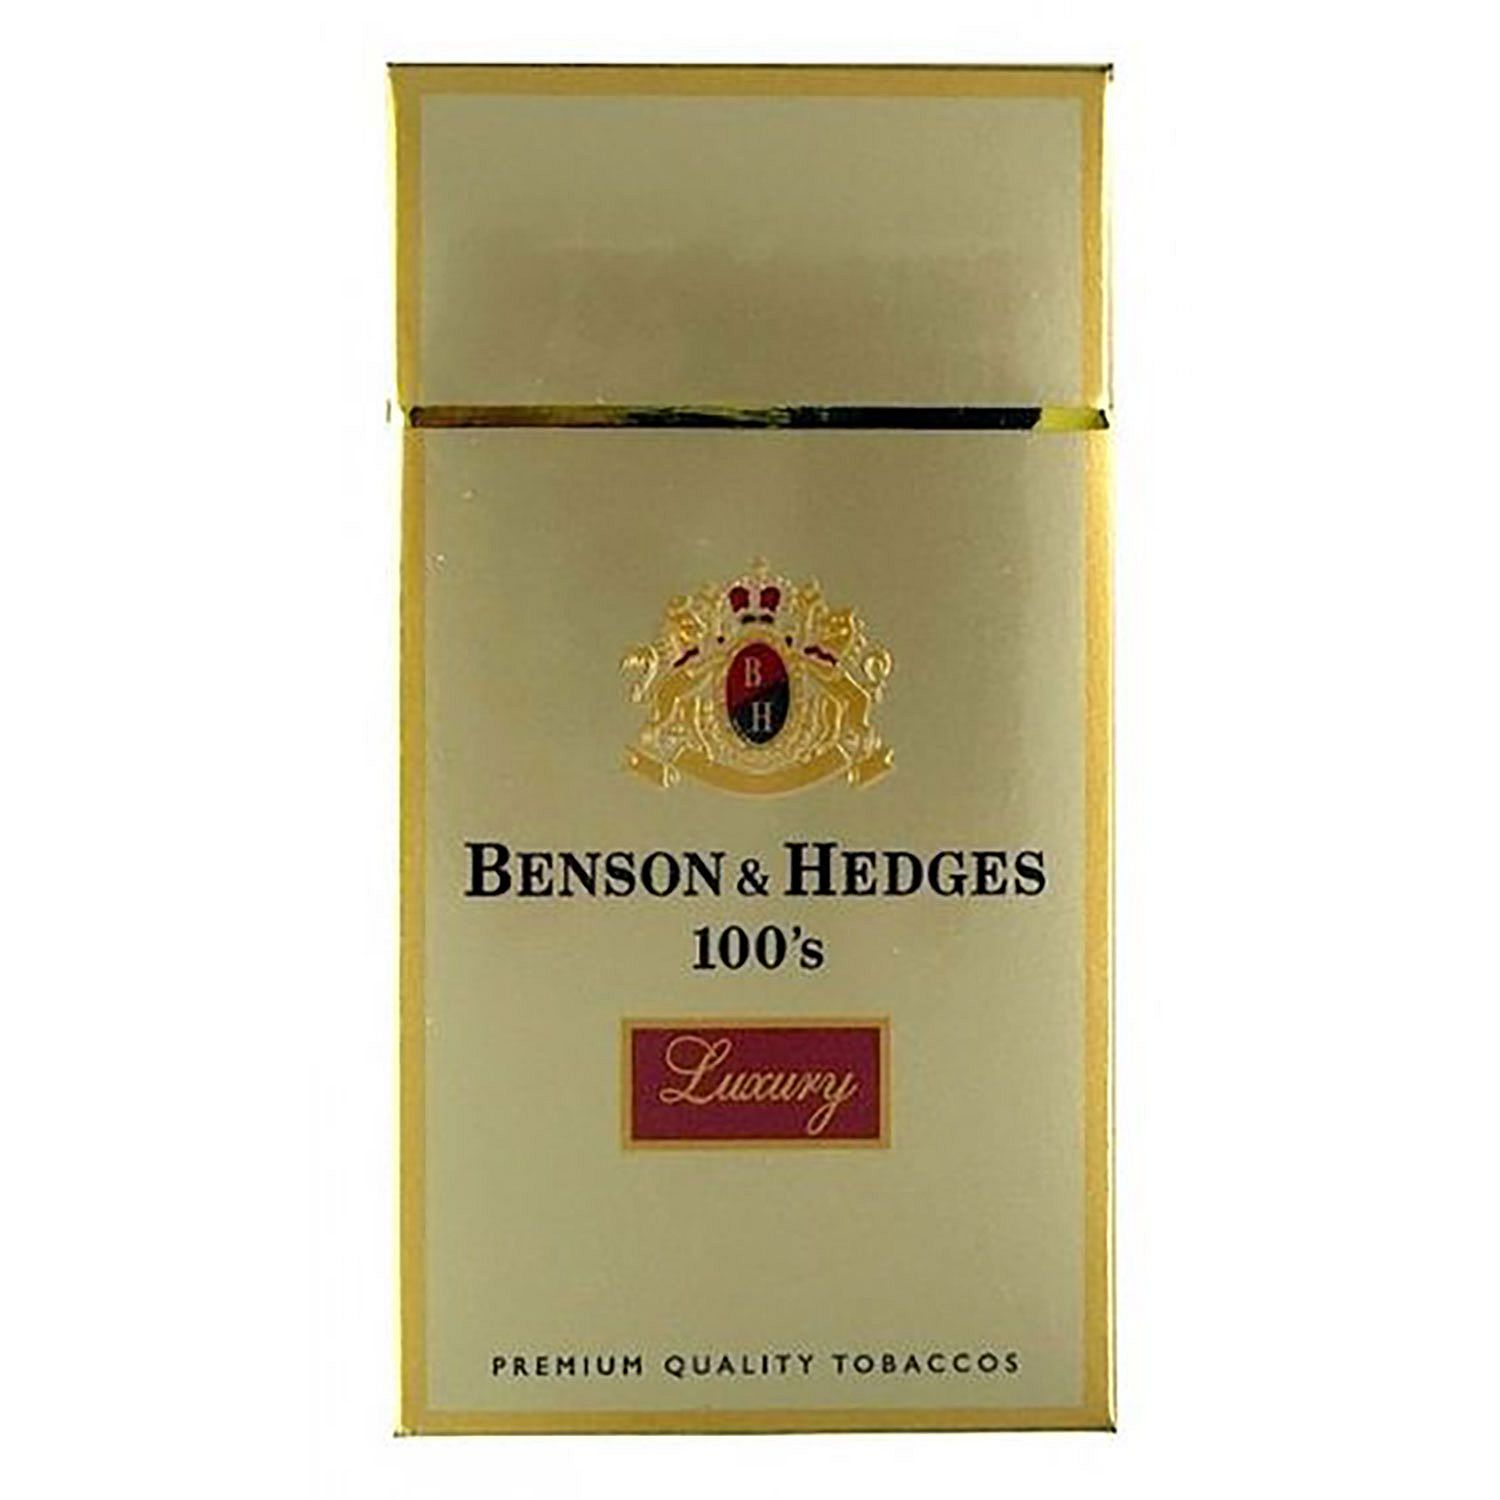 Benson & Hedges 100's Luxury cigarettes 10 cartons - Click Image to Close